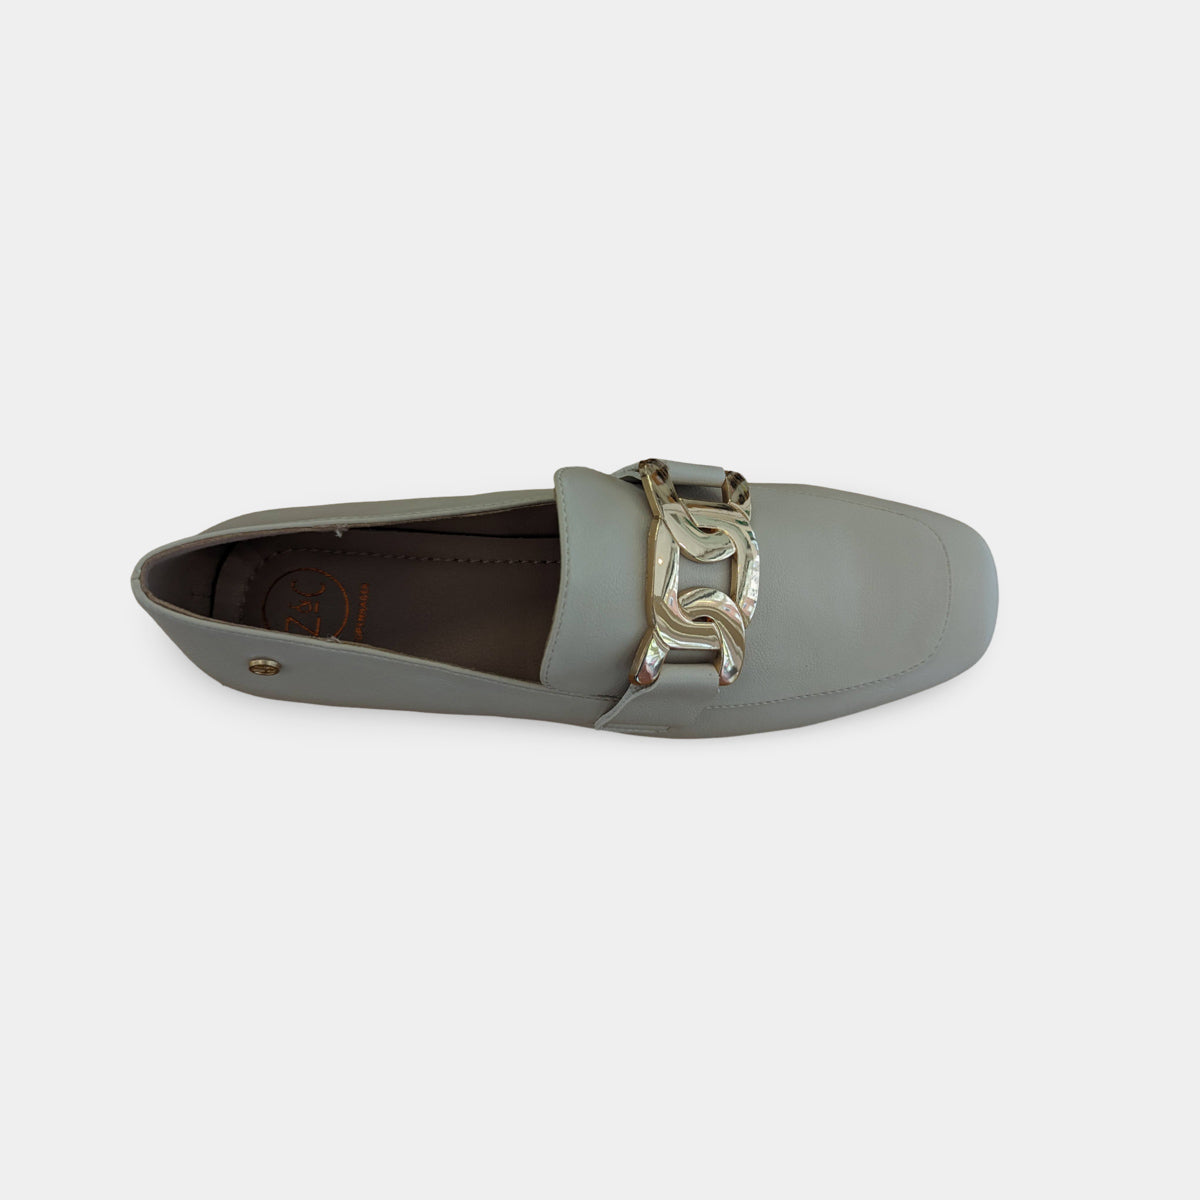 Full view highlighting the stylish yet affordable design of Zanni & Co loafers.